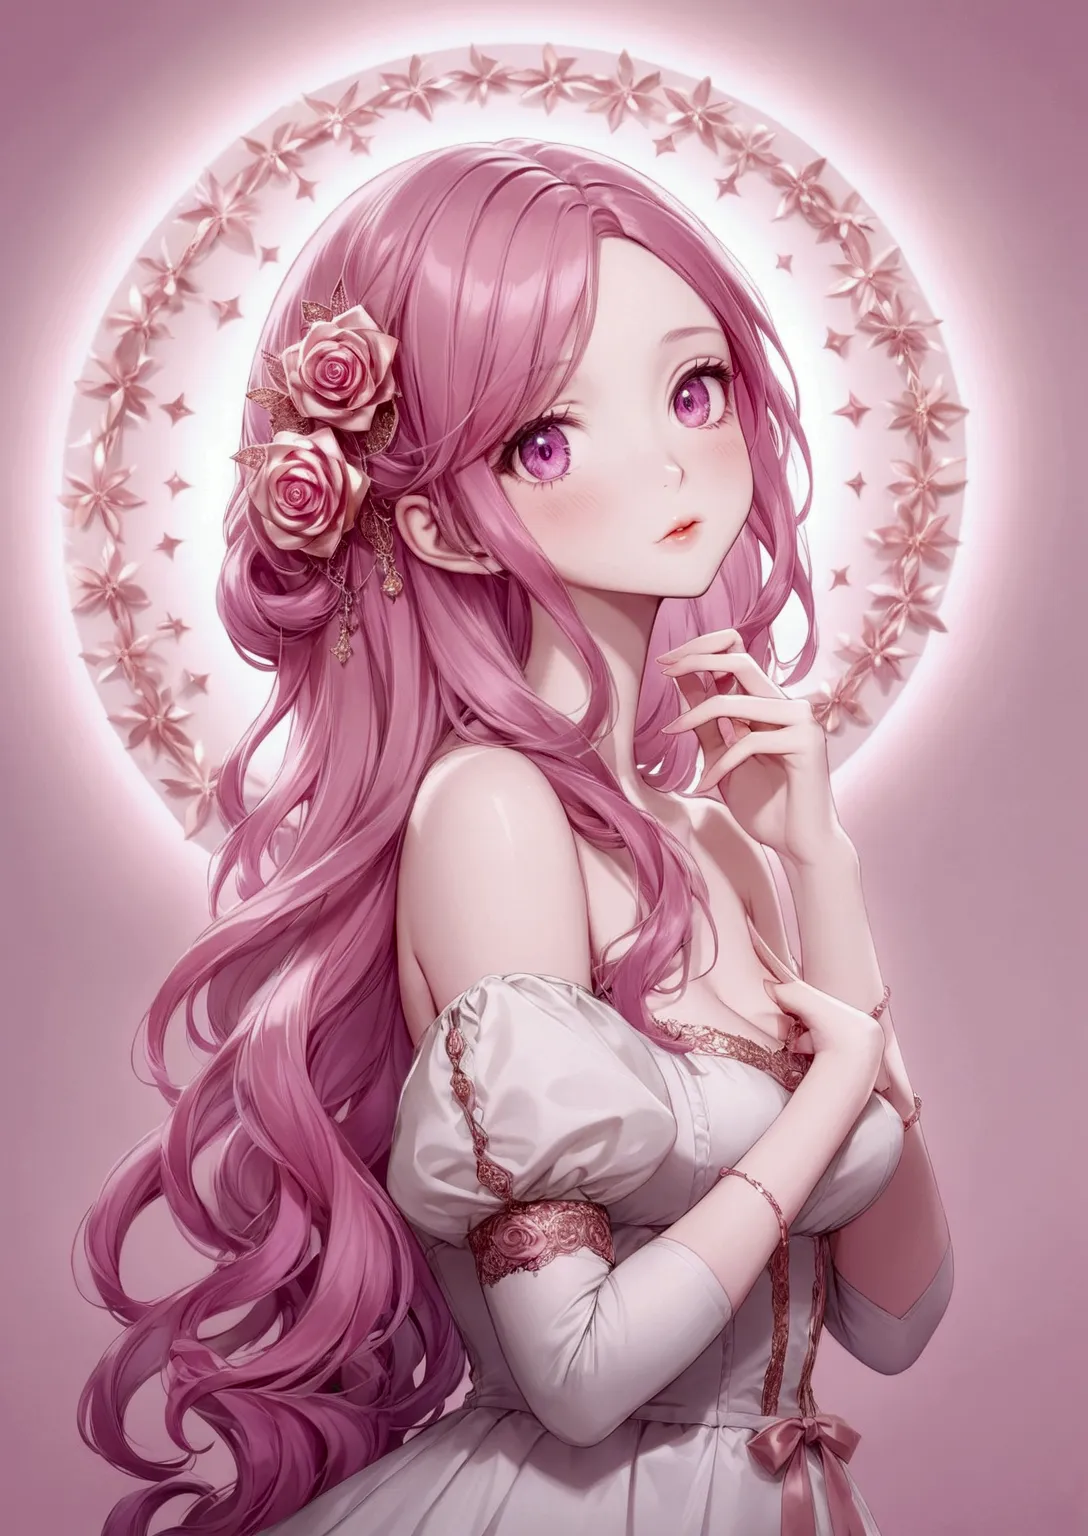 Adorable fair skinned pink haired magenta eyed European and slender young woman pink gold rose gold color theme